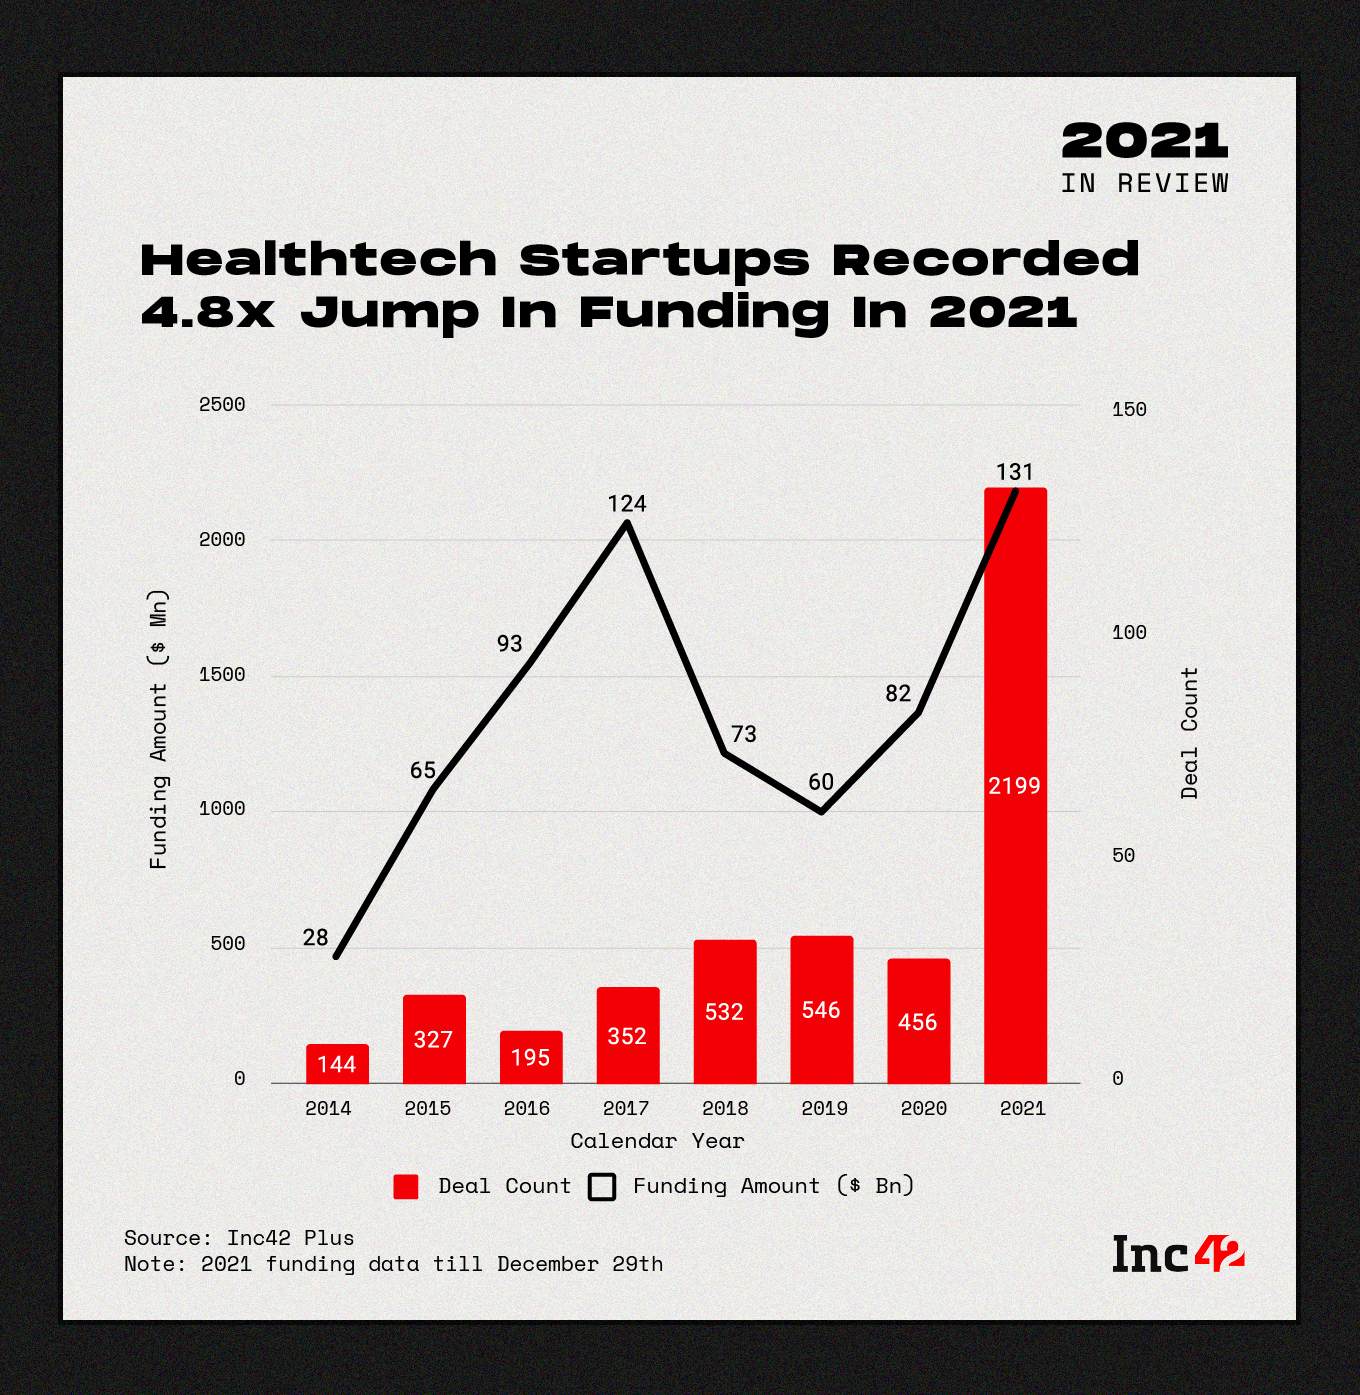 healthtech startups recorded 4.8x jump in funding in 2021